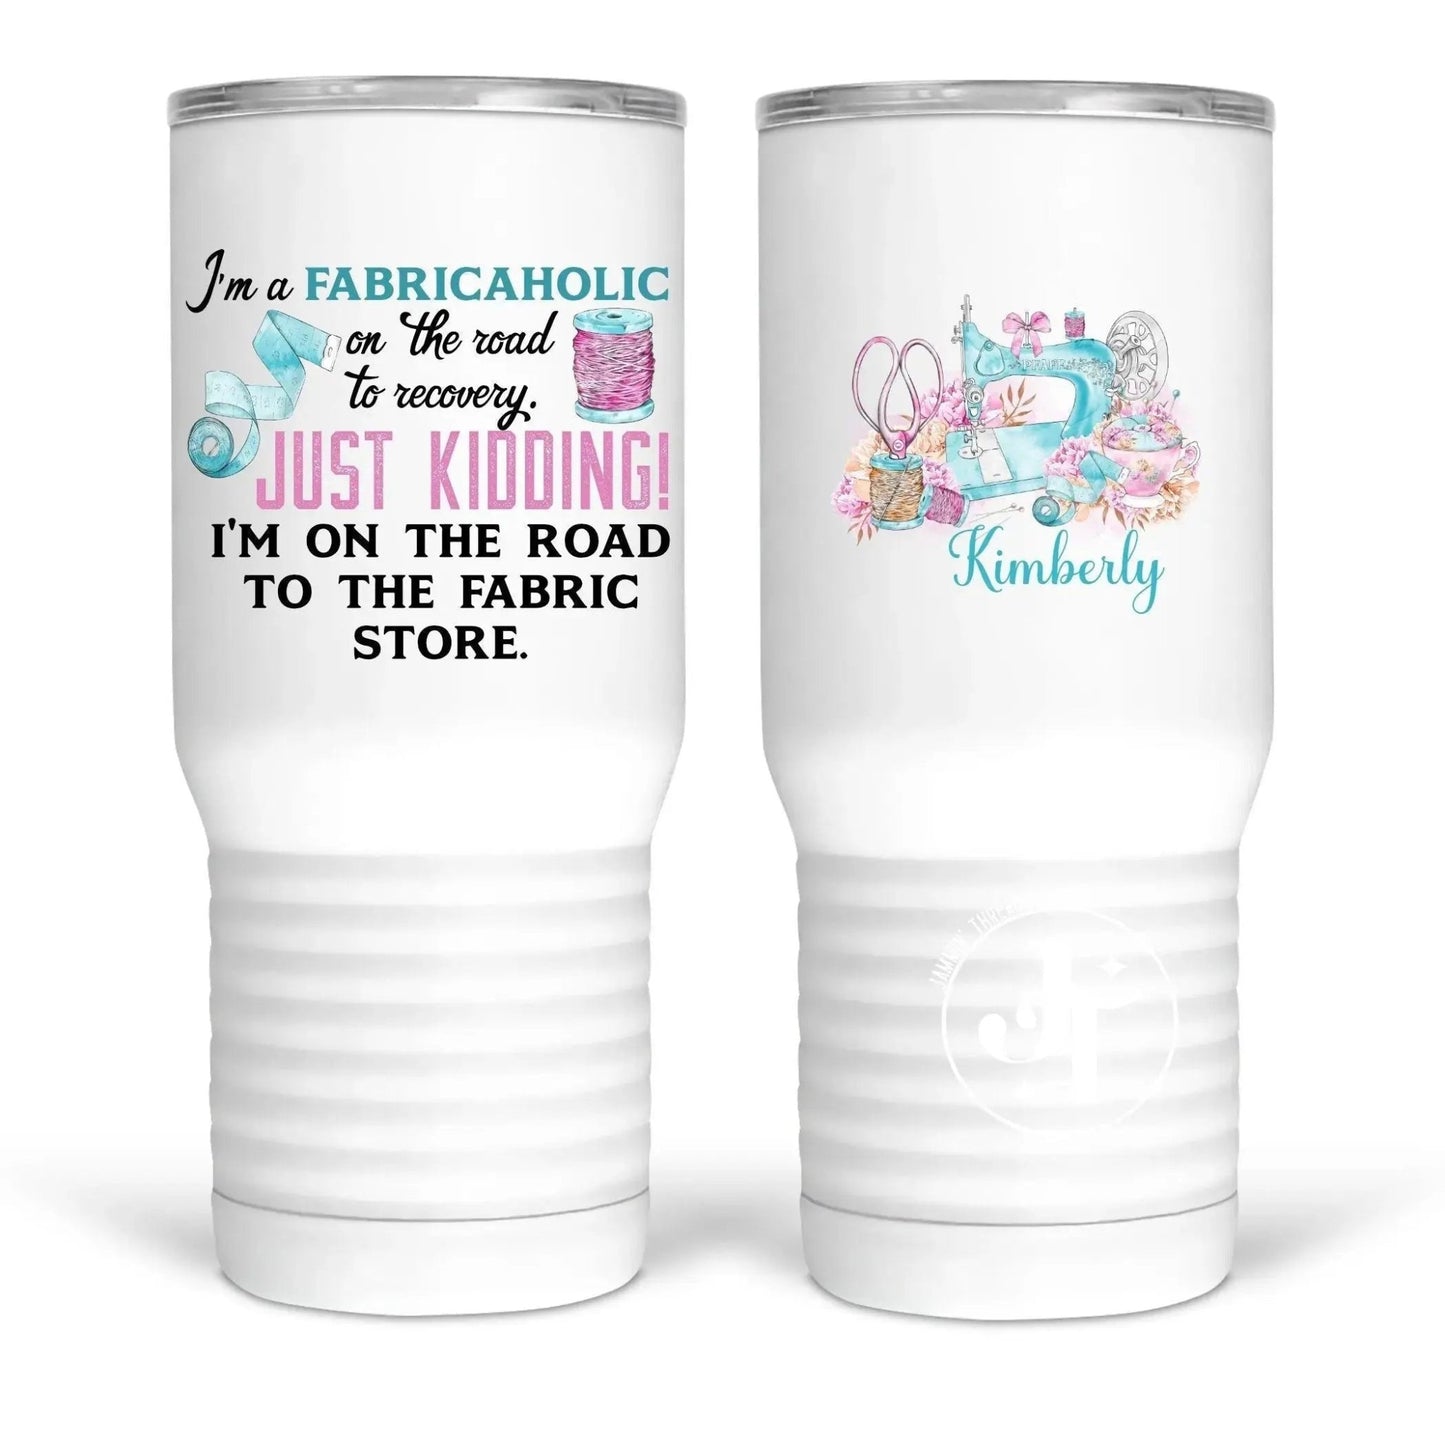 Fabricaholic - Funny ,personalized sewing and quilting mugs and tumblers - Jammin Threads